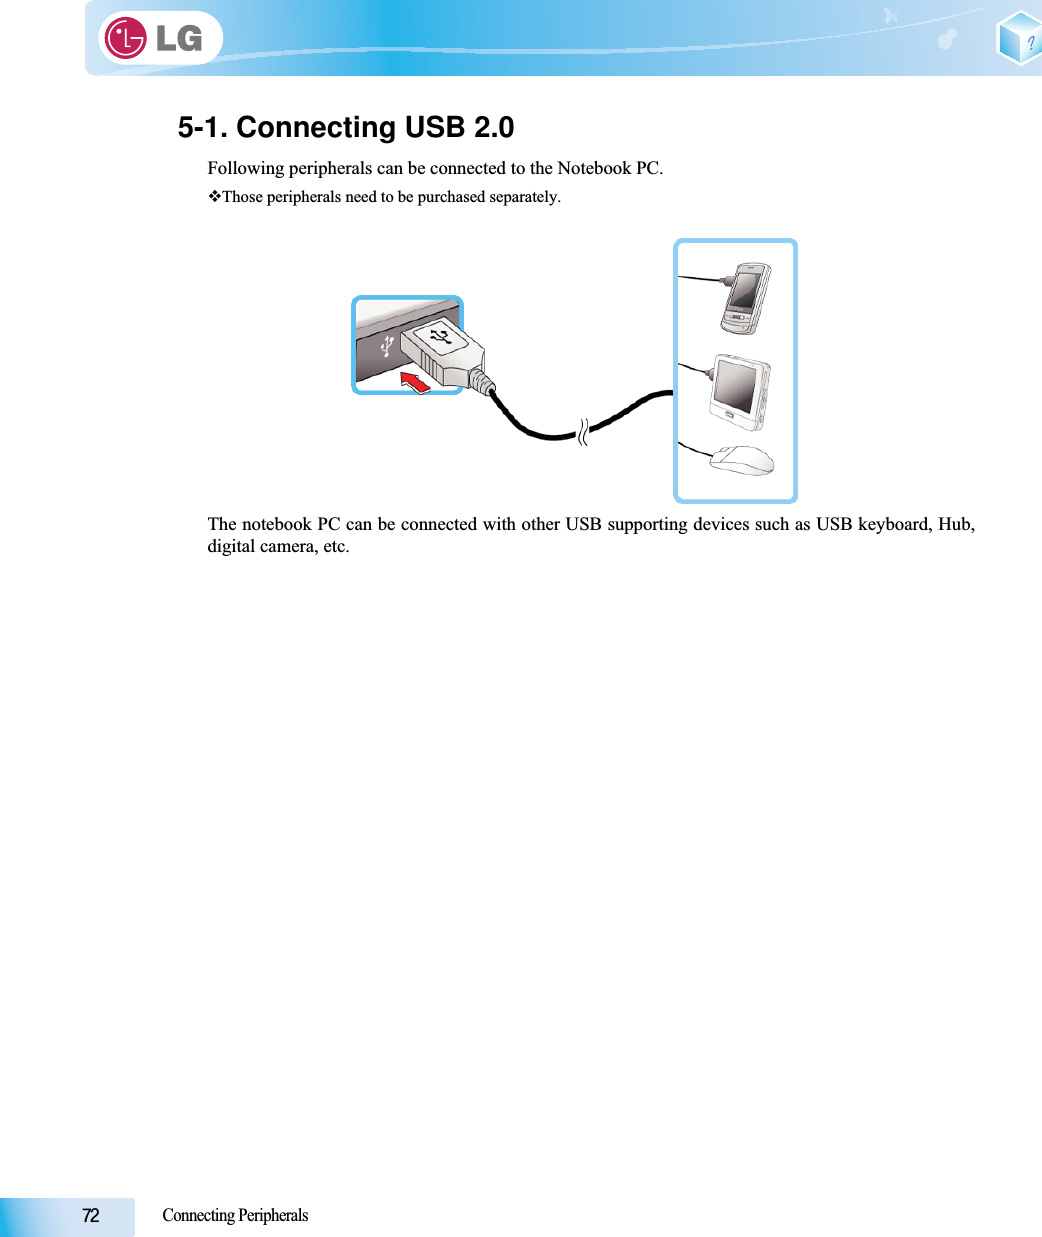 Connecting Peripherals5-1. Connecting USB 2.0Following peripherals can be connected to the Notebook PC. Those peripherals need to be purchased separately.The notebook PC can be connected with other USB supporting devices such as USB keyboard, Hub,digital camera, etc. 